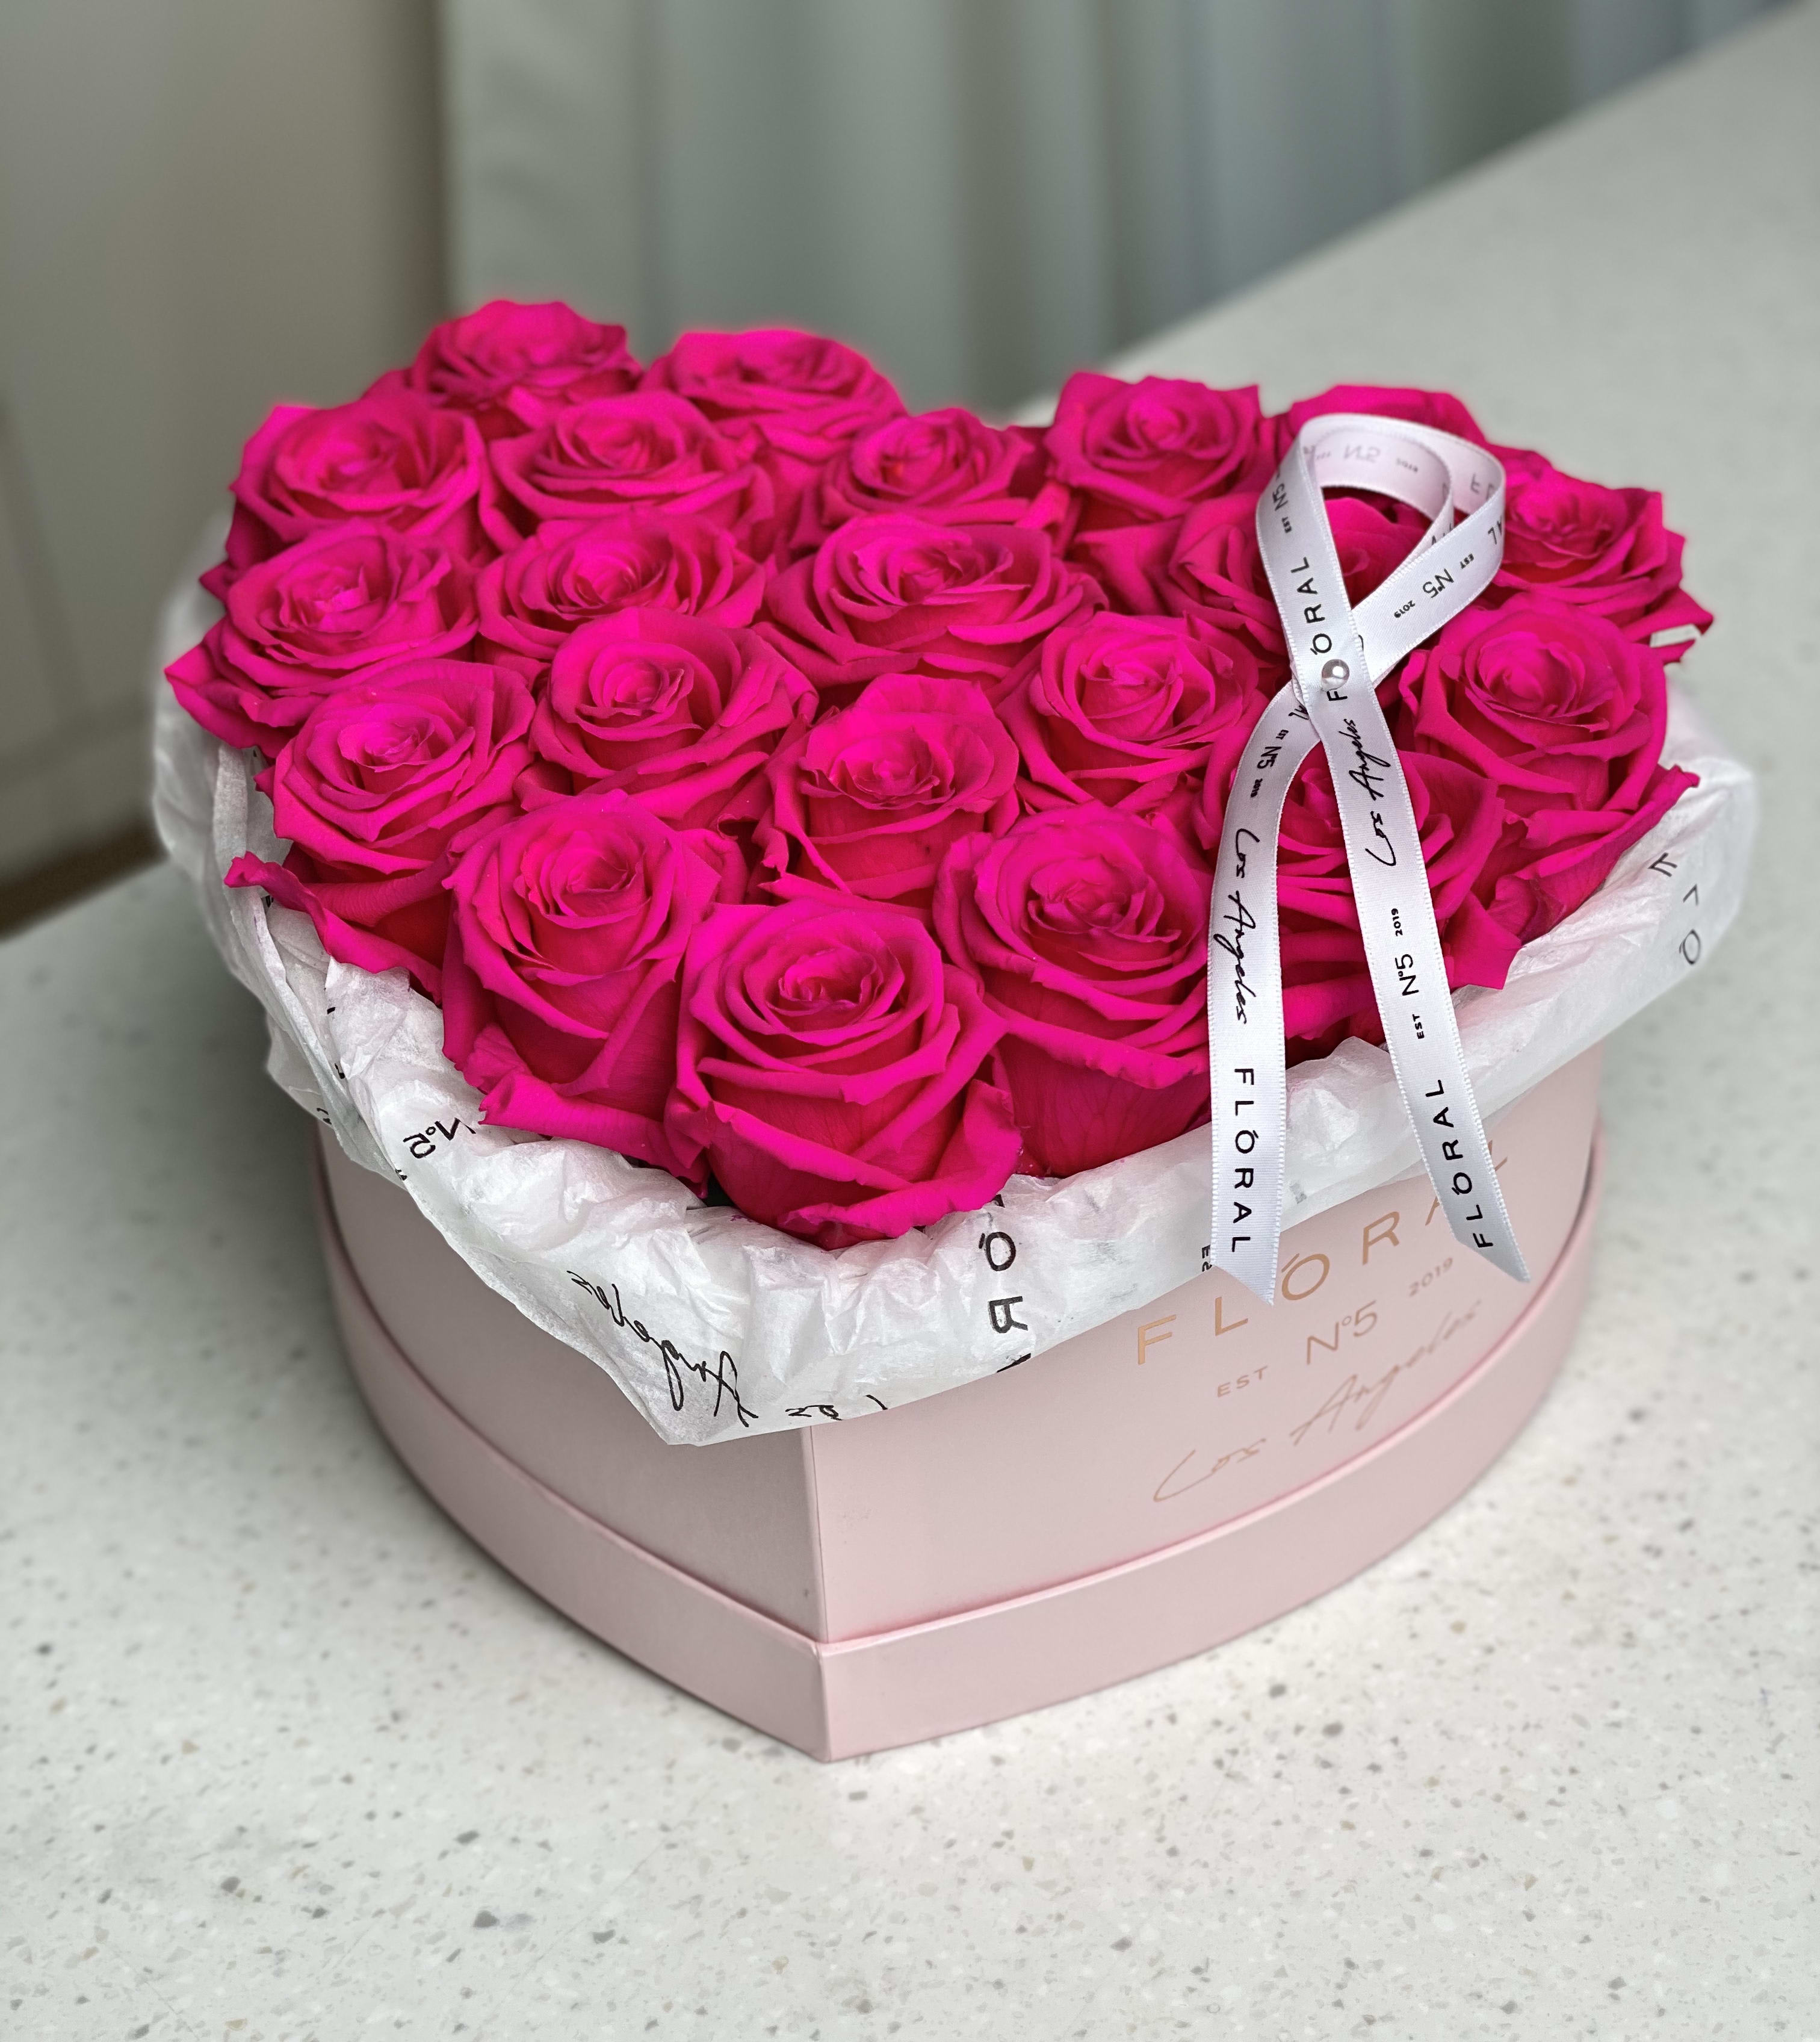 ⭐ No.504 - Pink Eternal Roses in Heart-Shaped Box in Studio City, CA